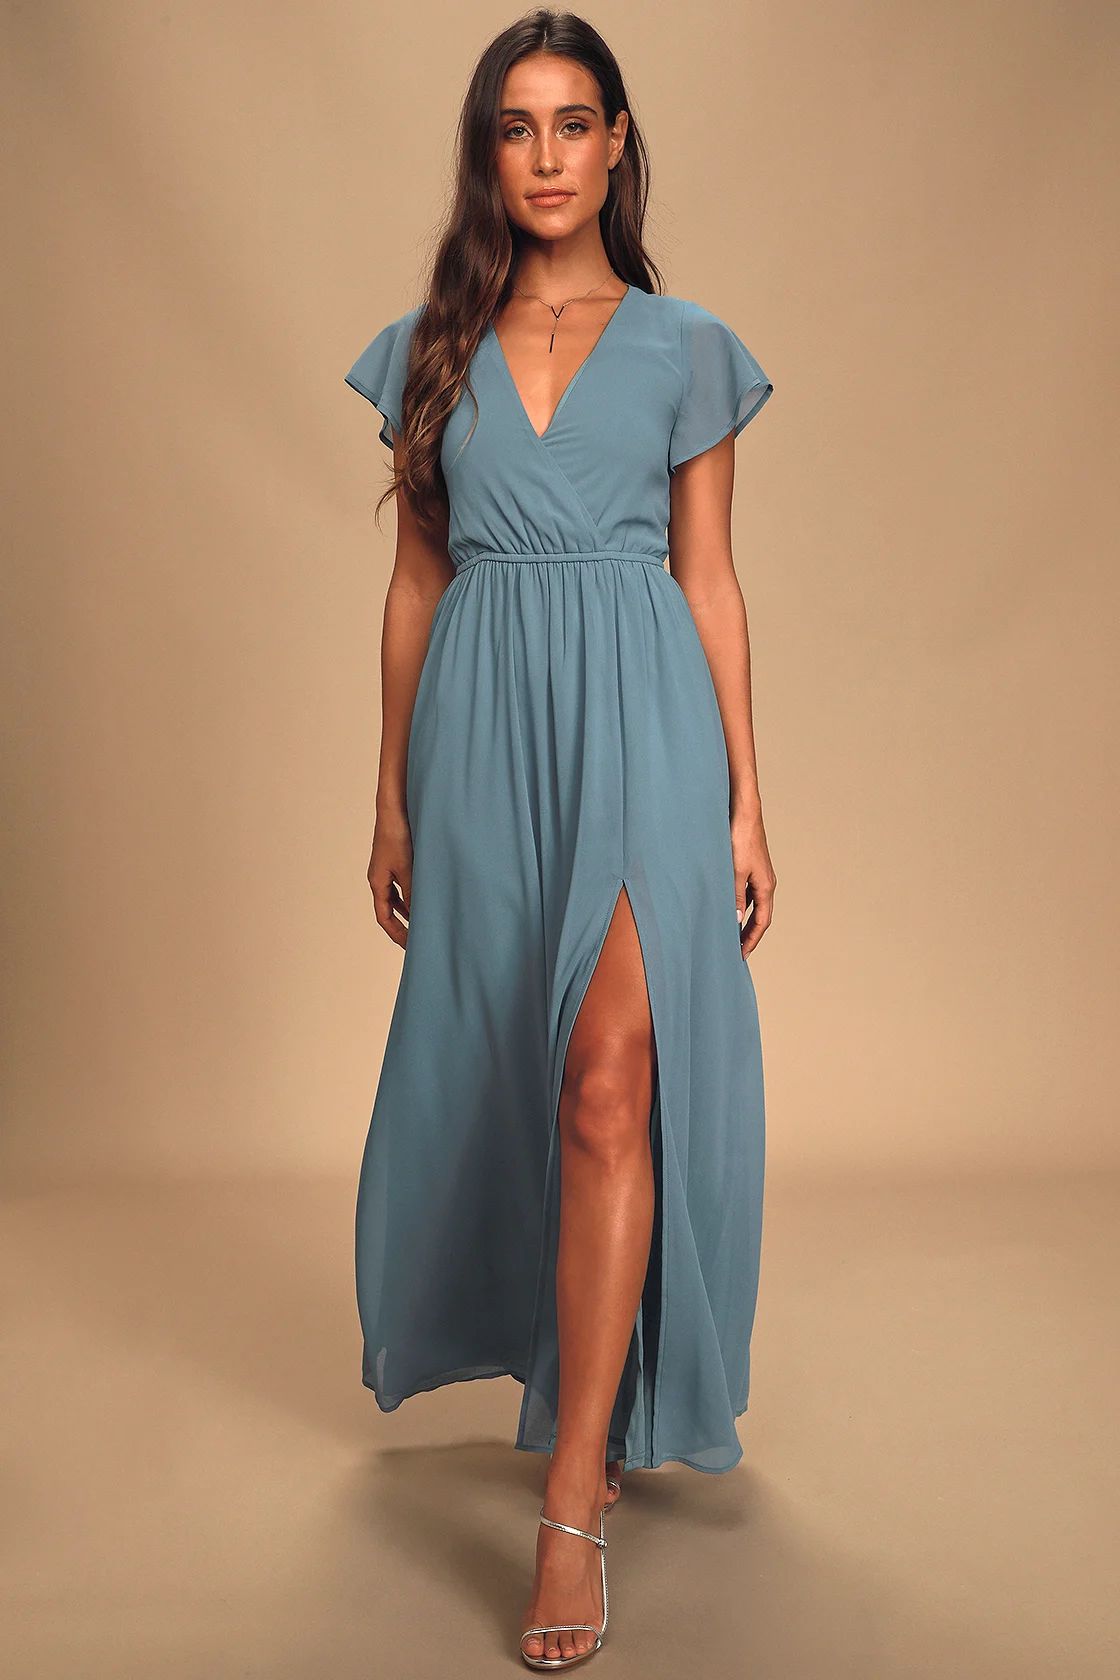 Lost in the Moment Slate Blue Maxi Dress | Lulus (US)